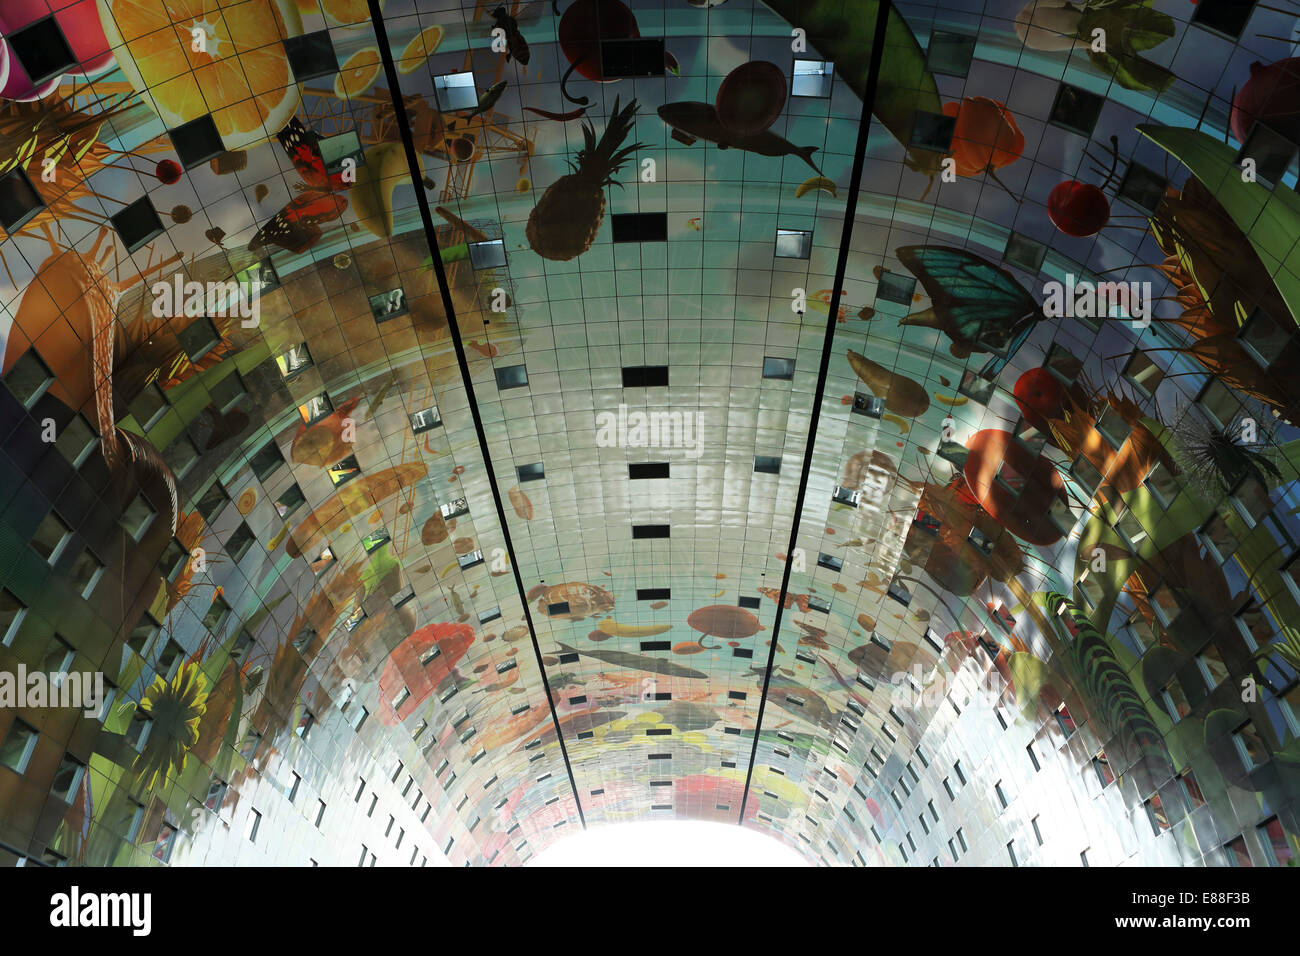 Rotterdam, Netherlands. 30th Sept, 2014. The ceiling of the Markthal Rotterdam in Rotterdam, the Netherlands. The covered market was designed by architects MVRDV and the interior bears the biggest artwork in the Netherlands, 'The Horn of Plenty' by Arno Coenen and Iris Roskam. The market was officially opened by Queen Maxima on 1 October 2014. Credit:  Stuart Forster/Alamy Live News Stock Photo